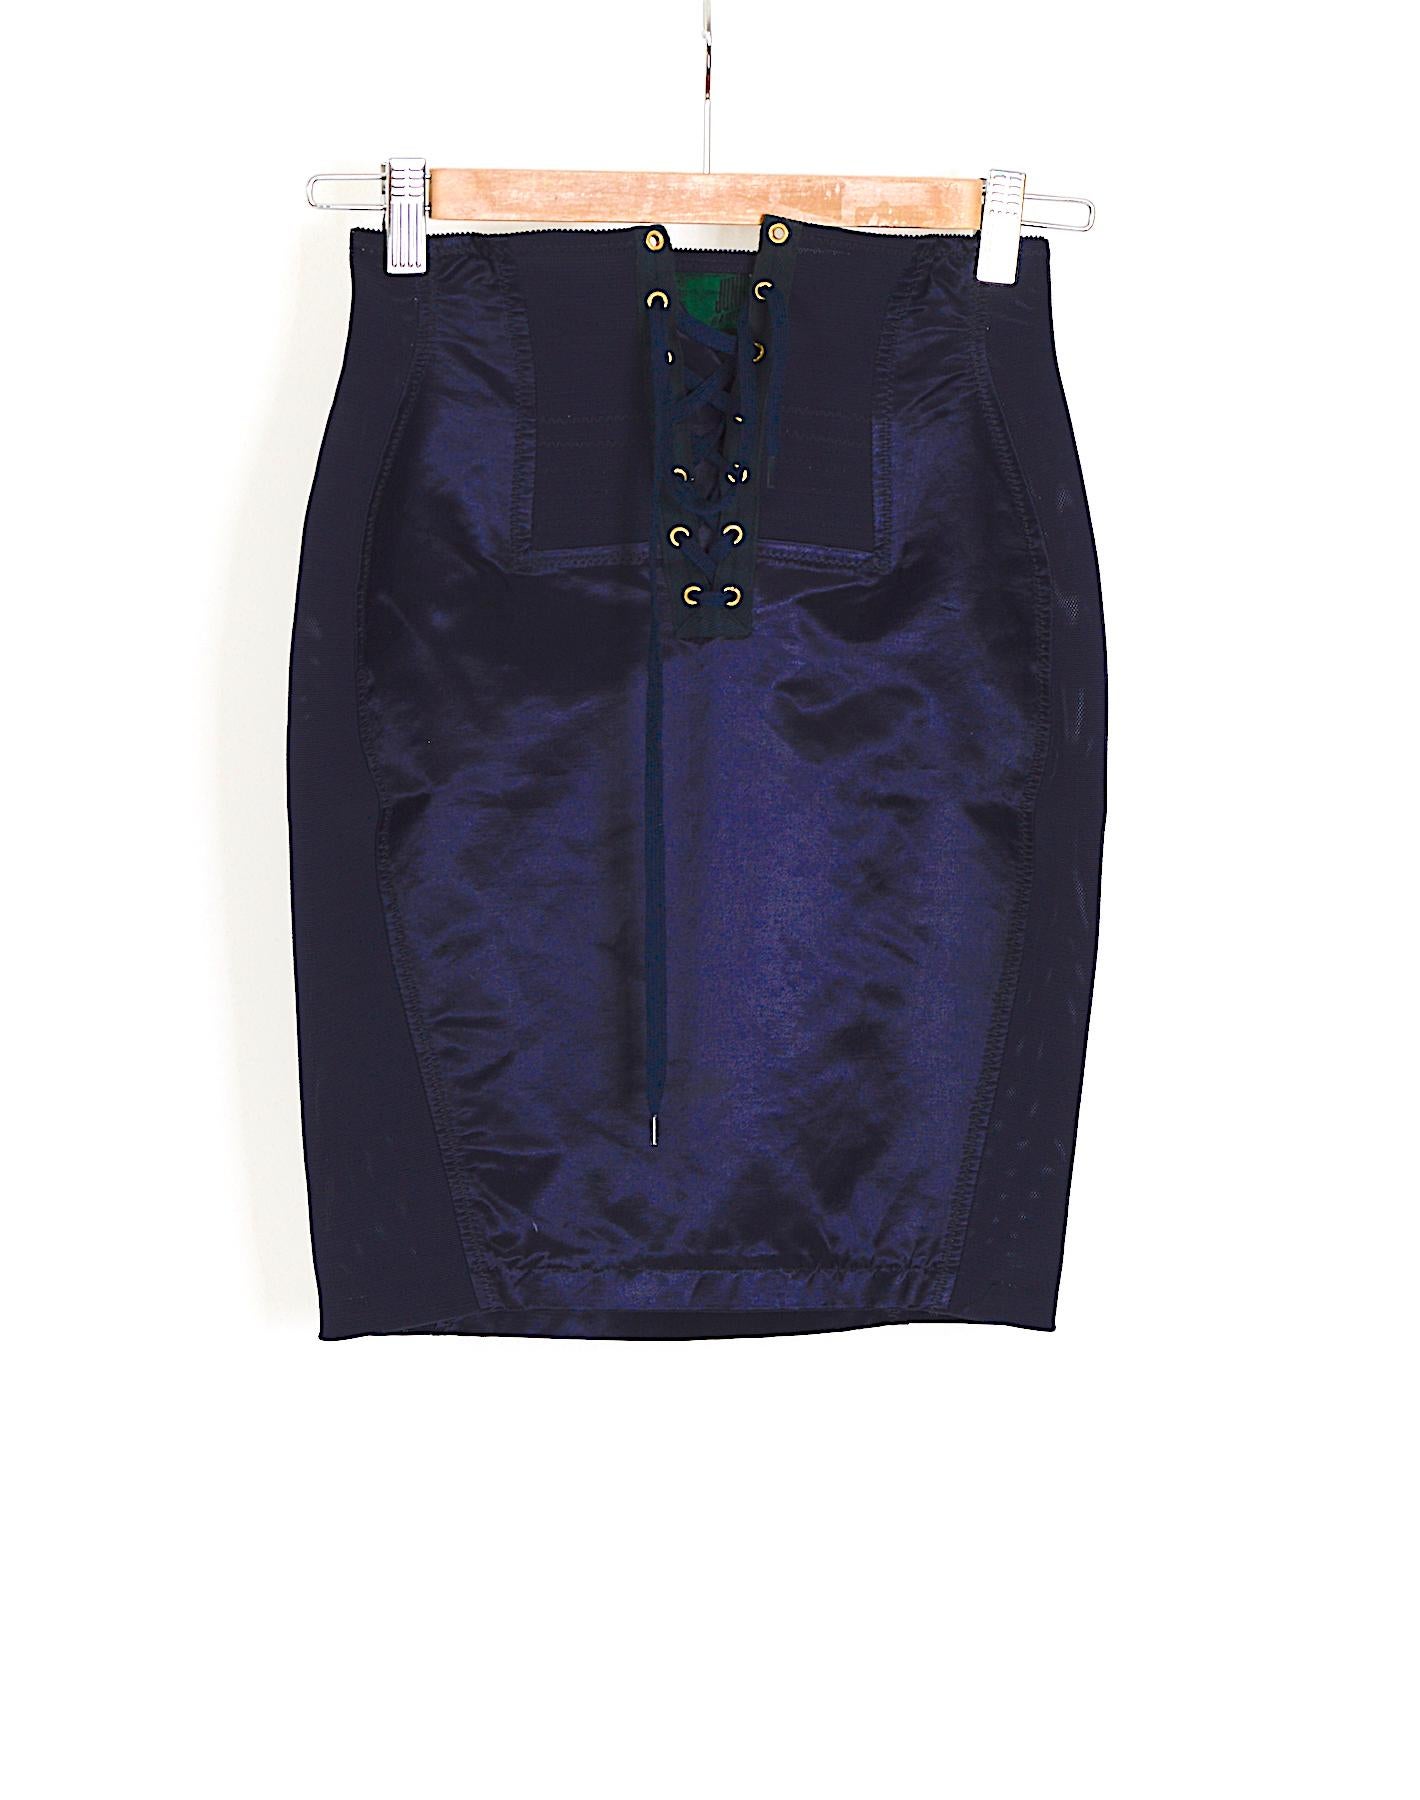 Vintage Jean Paul Gaultier 1980s corset inspired bleu spandex and satin skirt For Sale 2